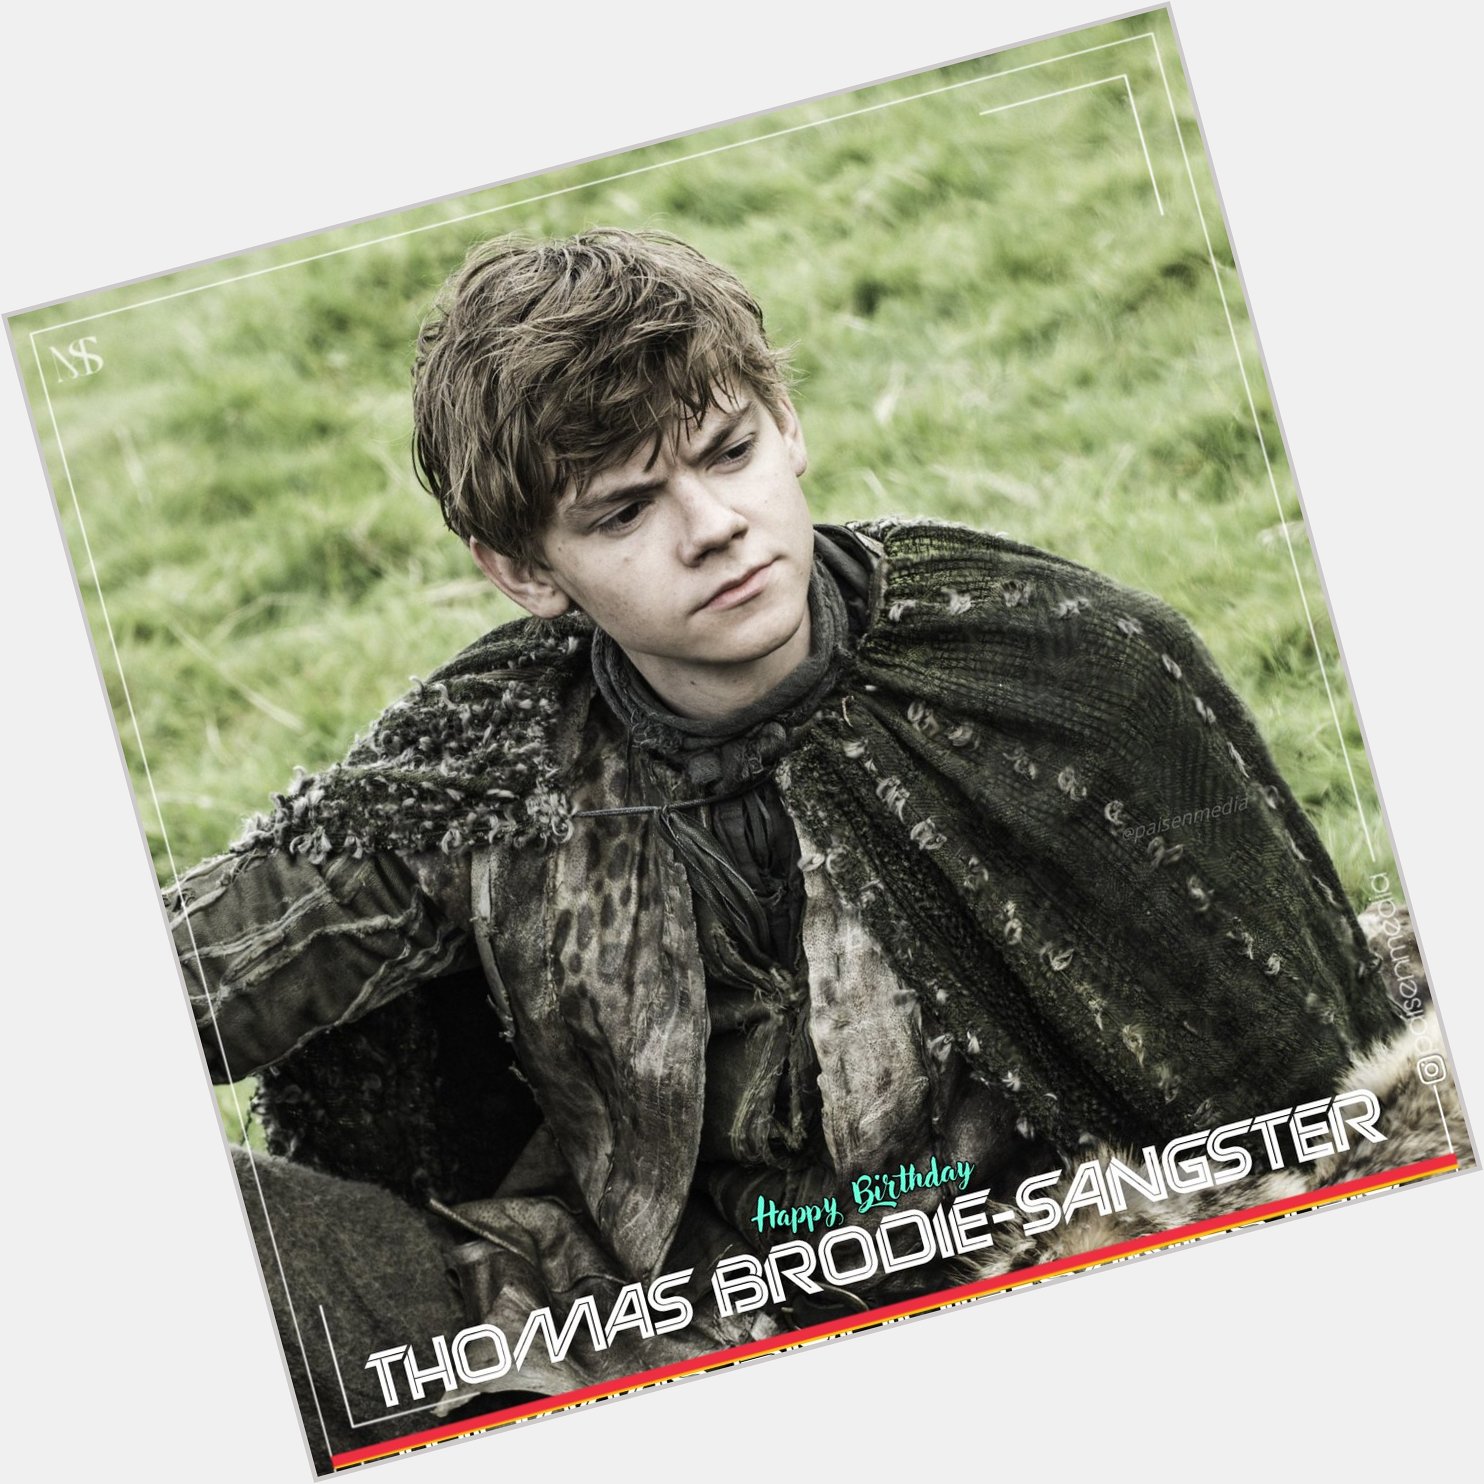 Wishing a very Happy Birthday to Thomas Brodie-Sangster sir .
.
.
.   